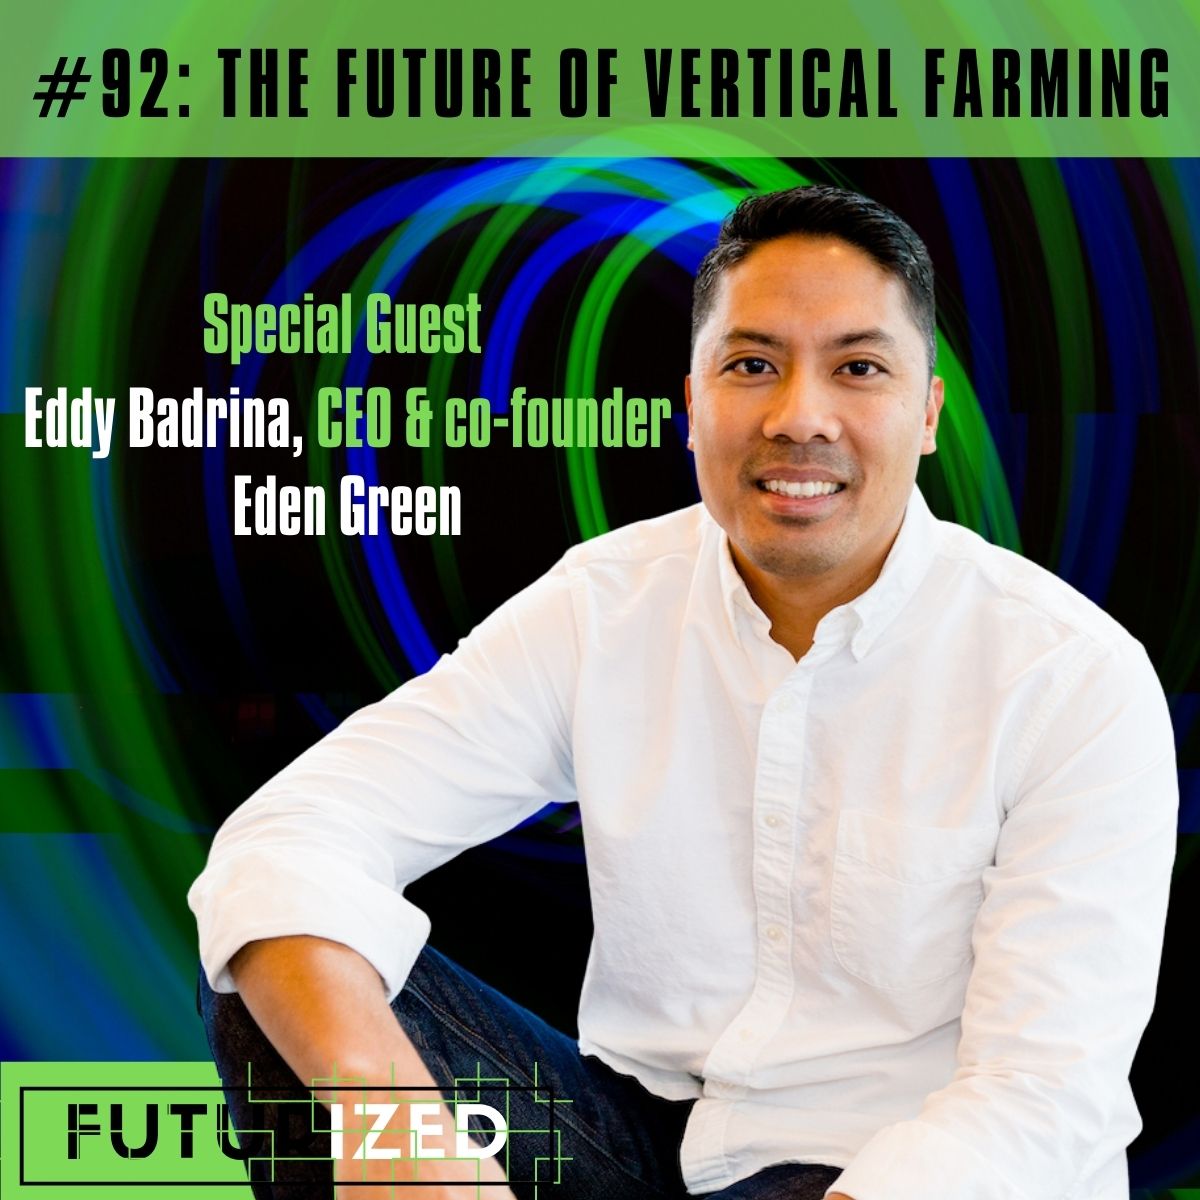 The Future of Vertical Farming Image